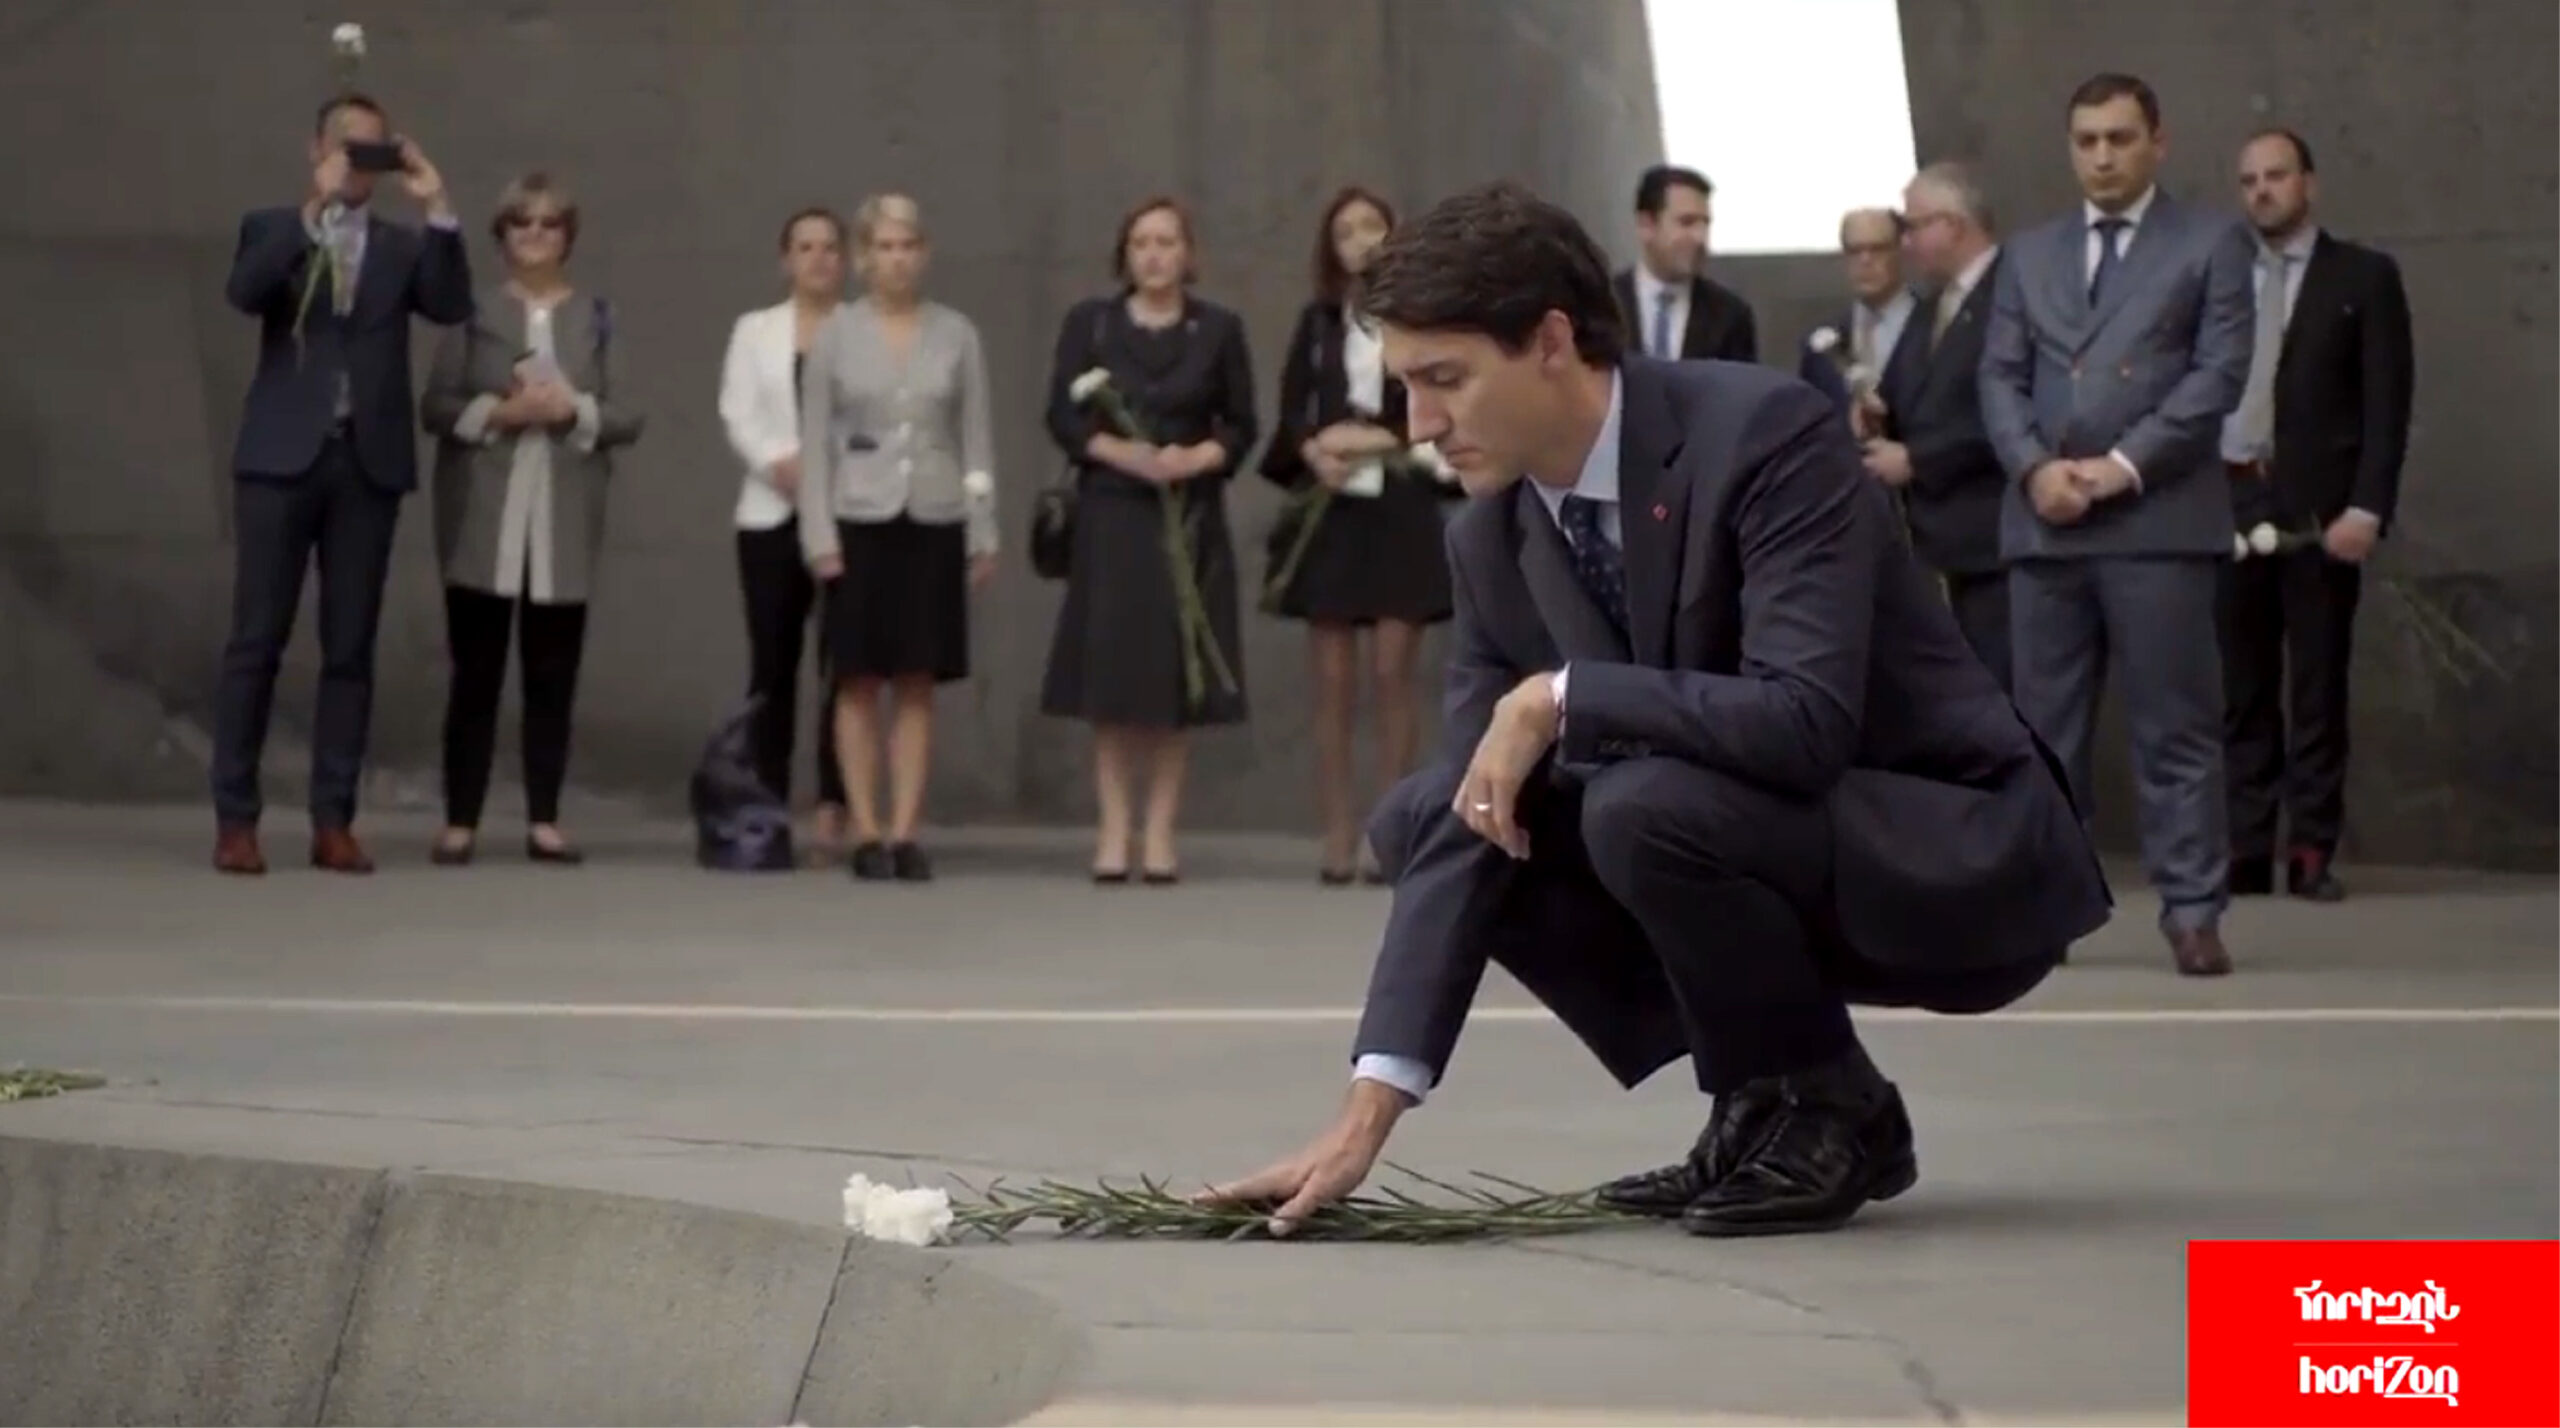 Canadian Prime Minister Justin Trudeau issued a statement on Armenian Genocide Memorial Day on April 24. Below is the full statement released by Trudeau’s office. “Today, we join Armenian communities in Canada and around the world to mark Armenian Genocide Memorial Day. We reflect on this dark chapter in history, honour the victims who lost